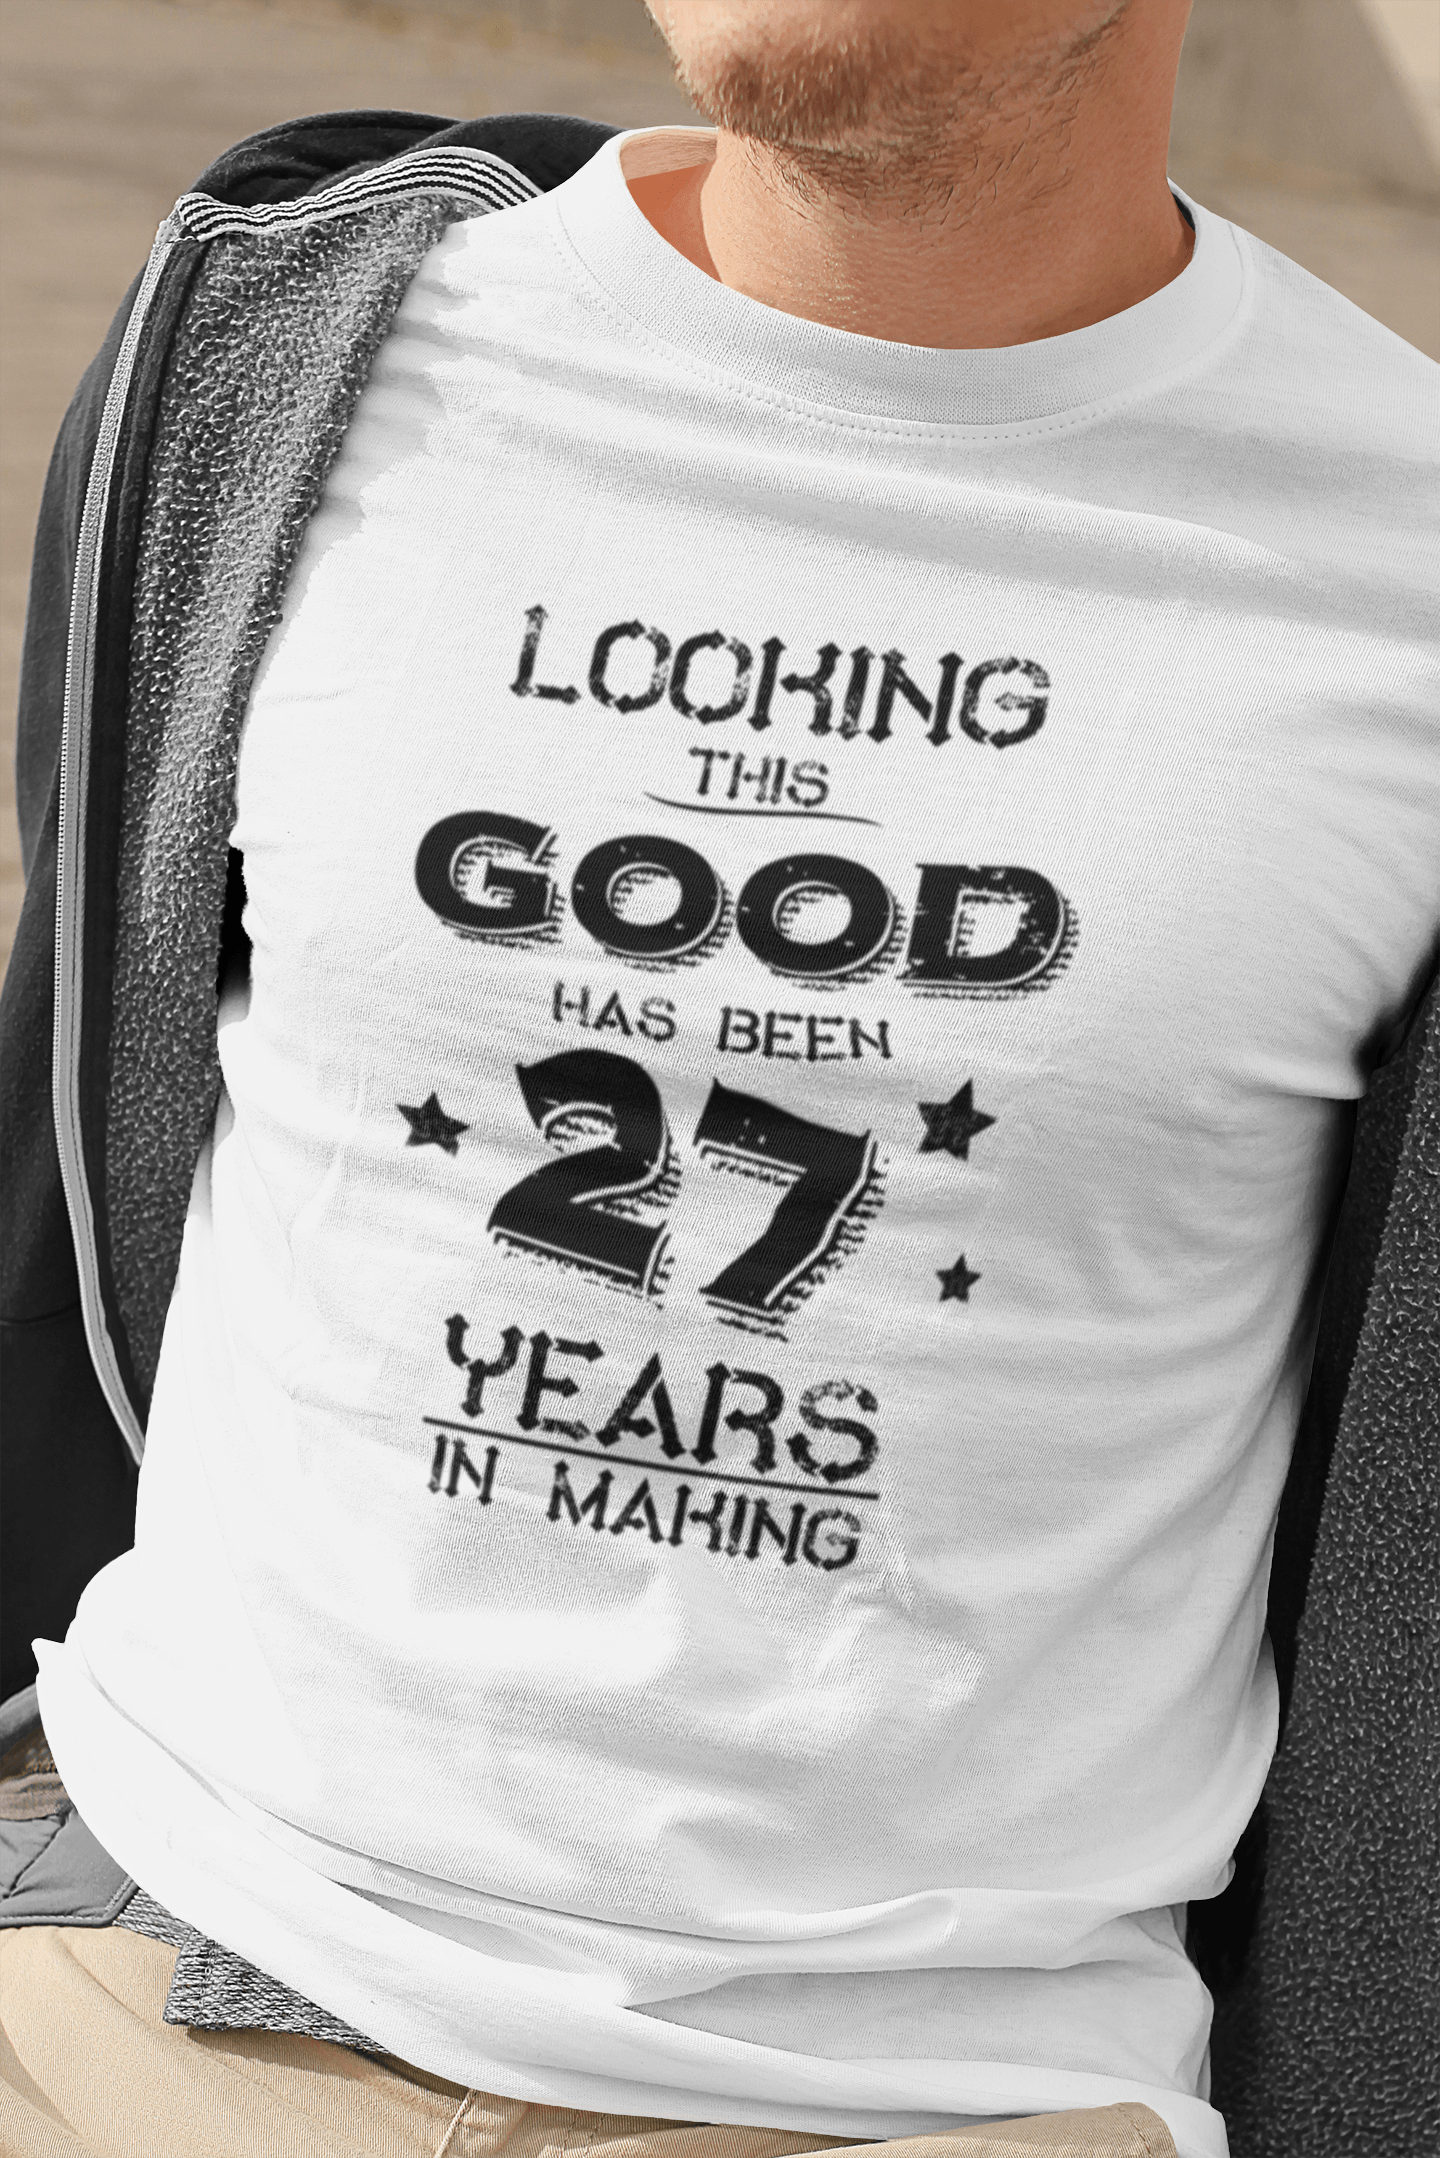 Looking This Good Has Been 27 Years is Making Men's T-shirt White Birthday Gift 00438